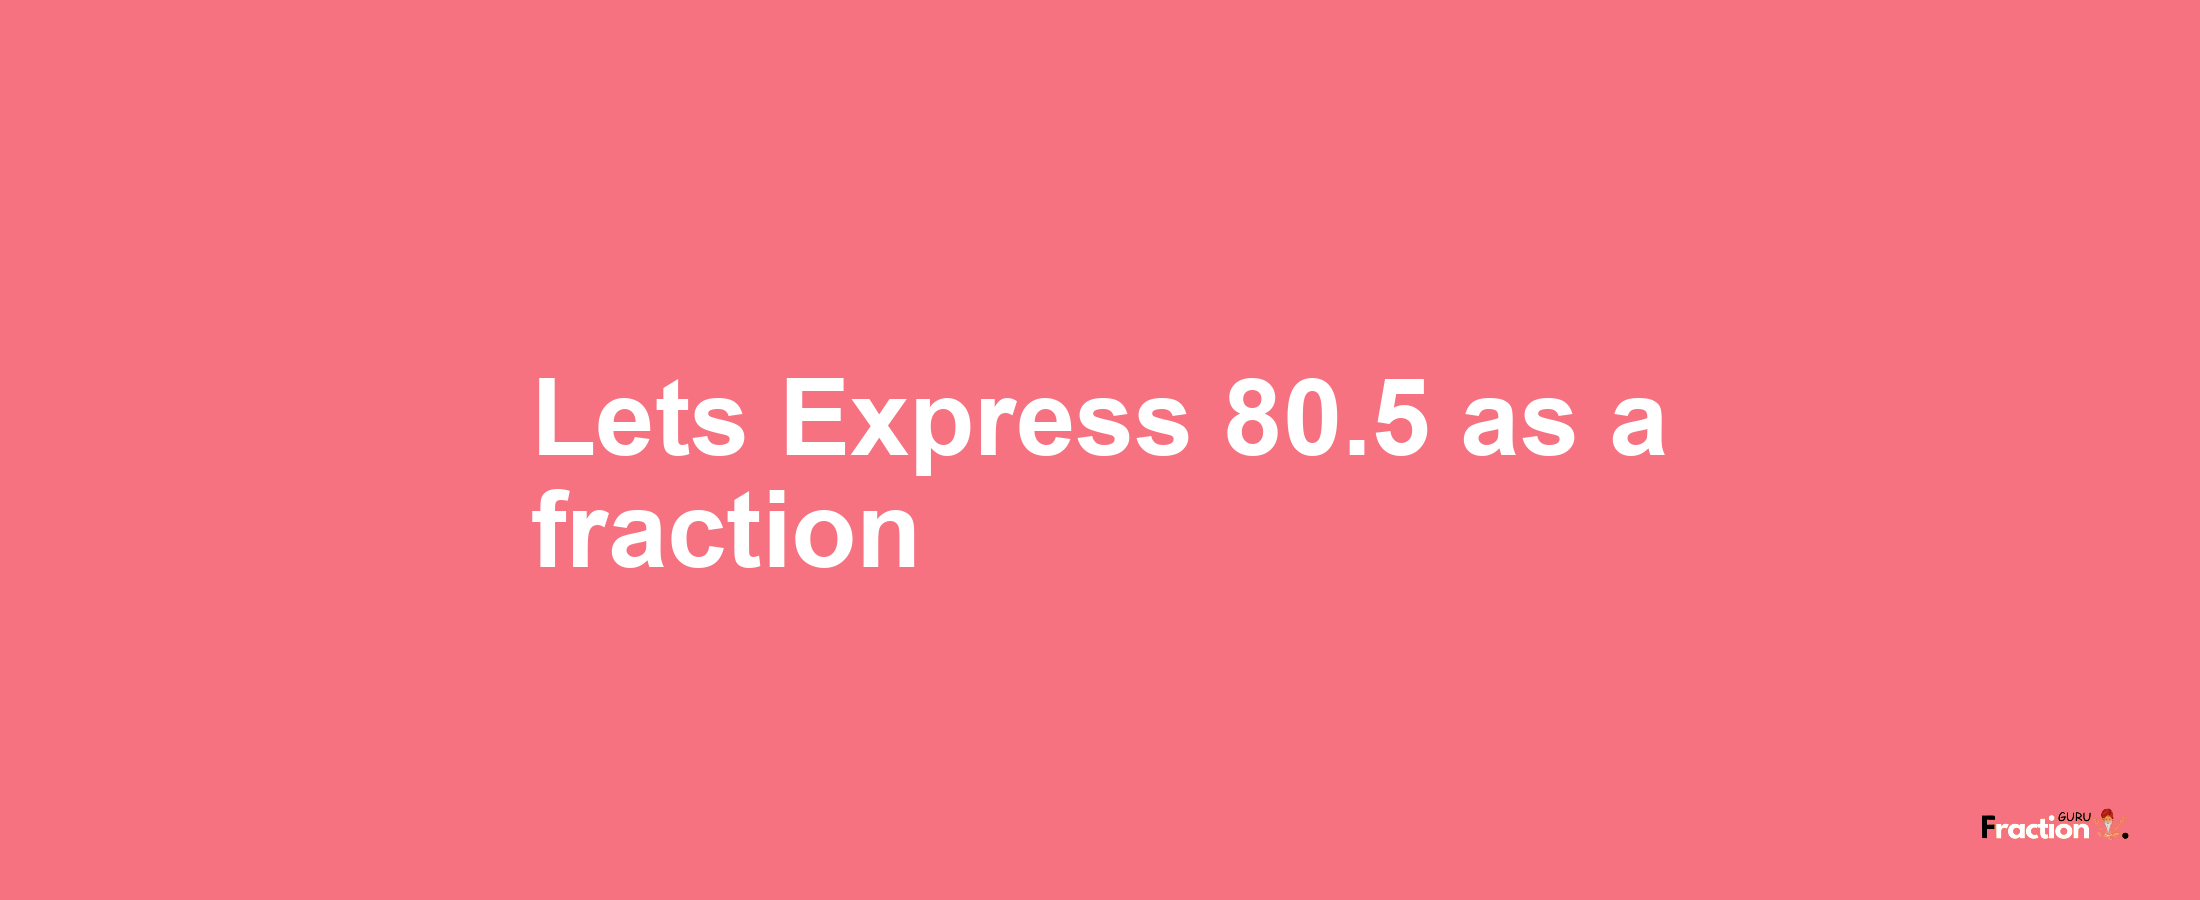 Lets Express 80.5 as afraction